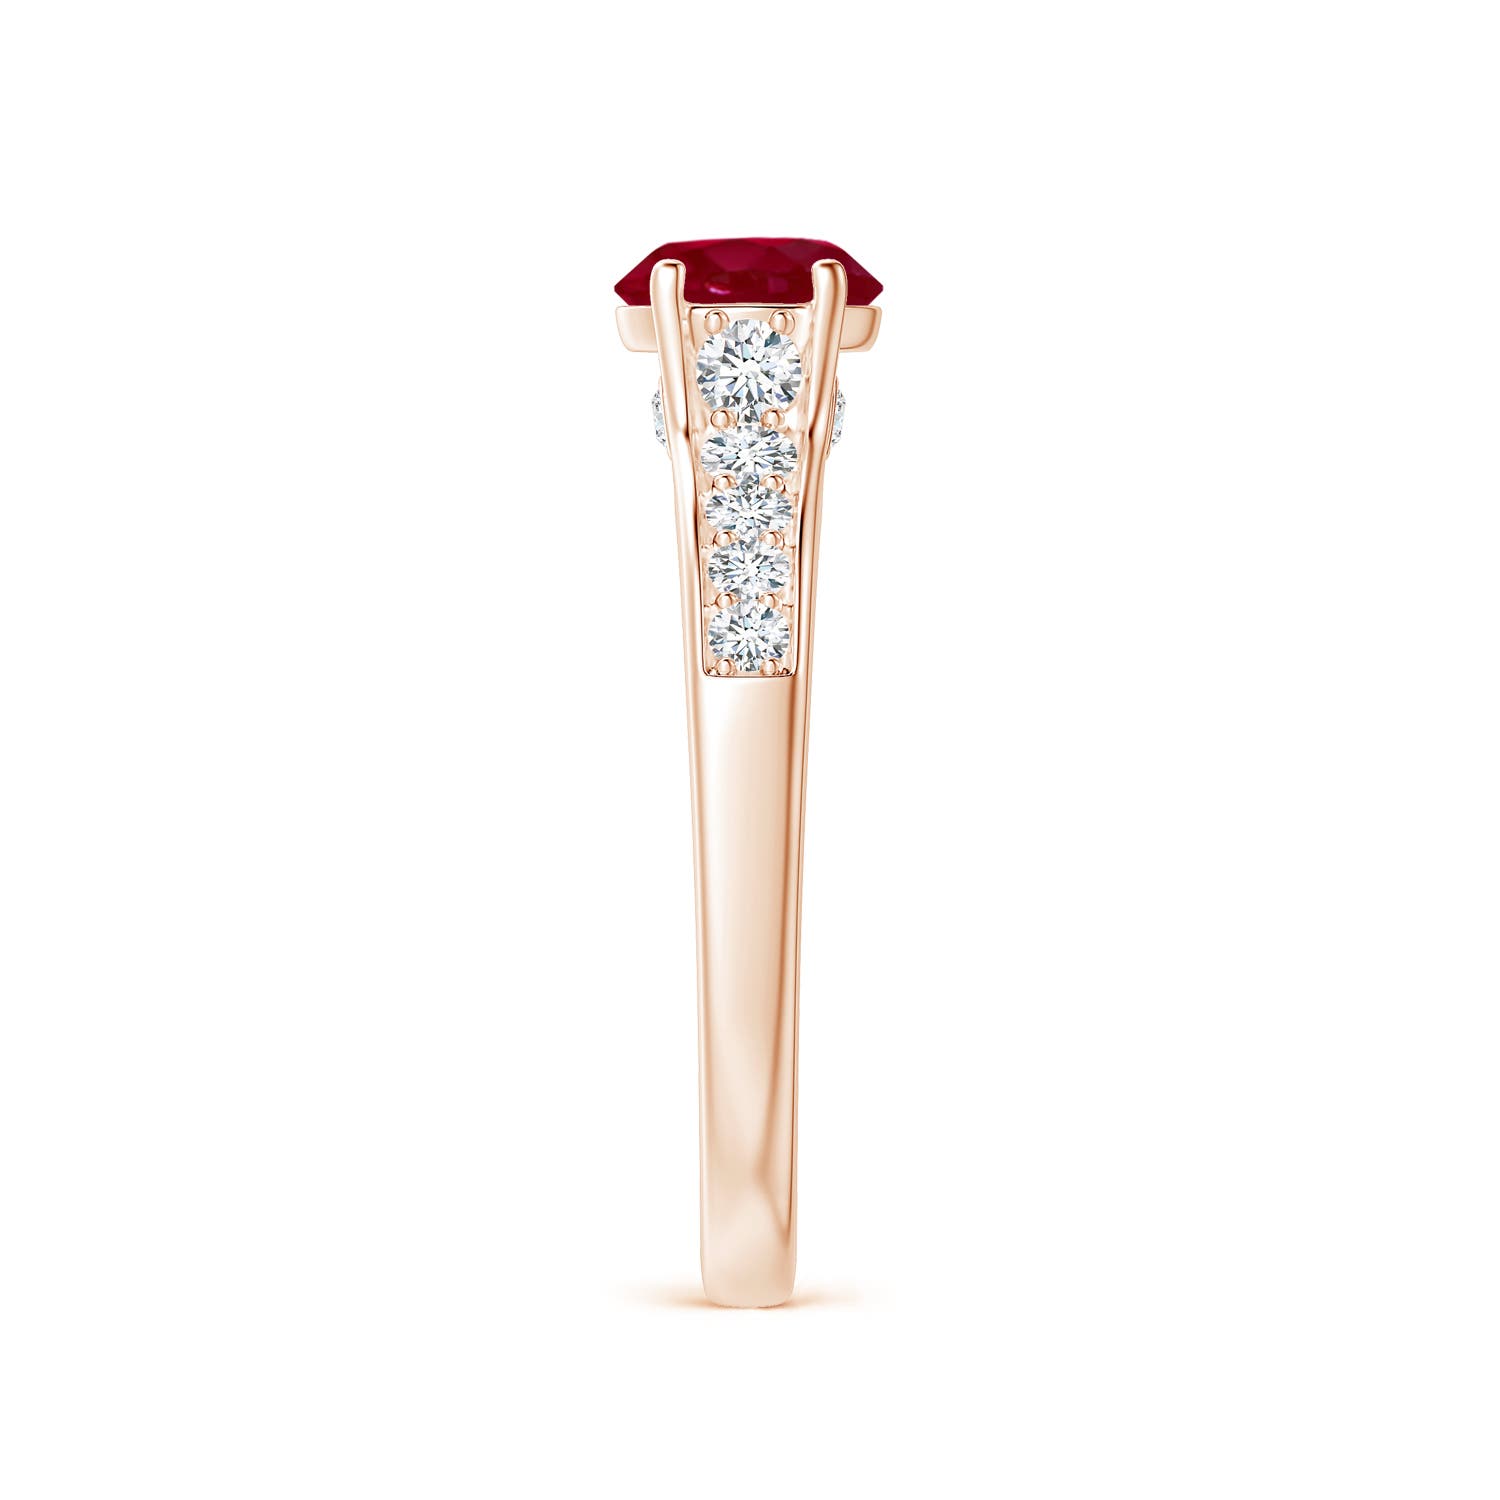 AA - Ruby / 1.38 CT / 14 KT Rose Gold